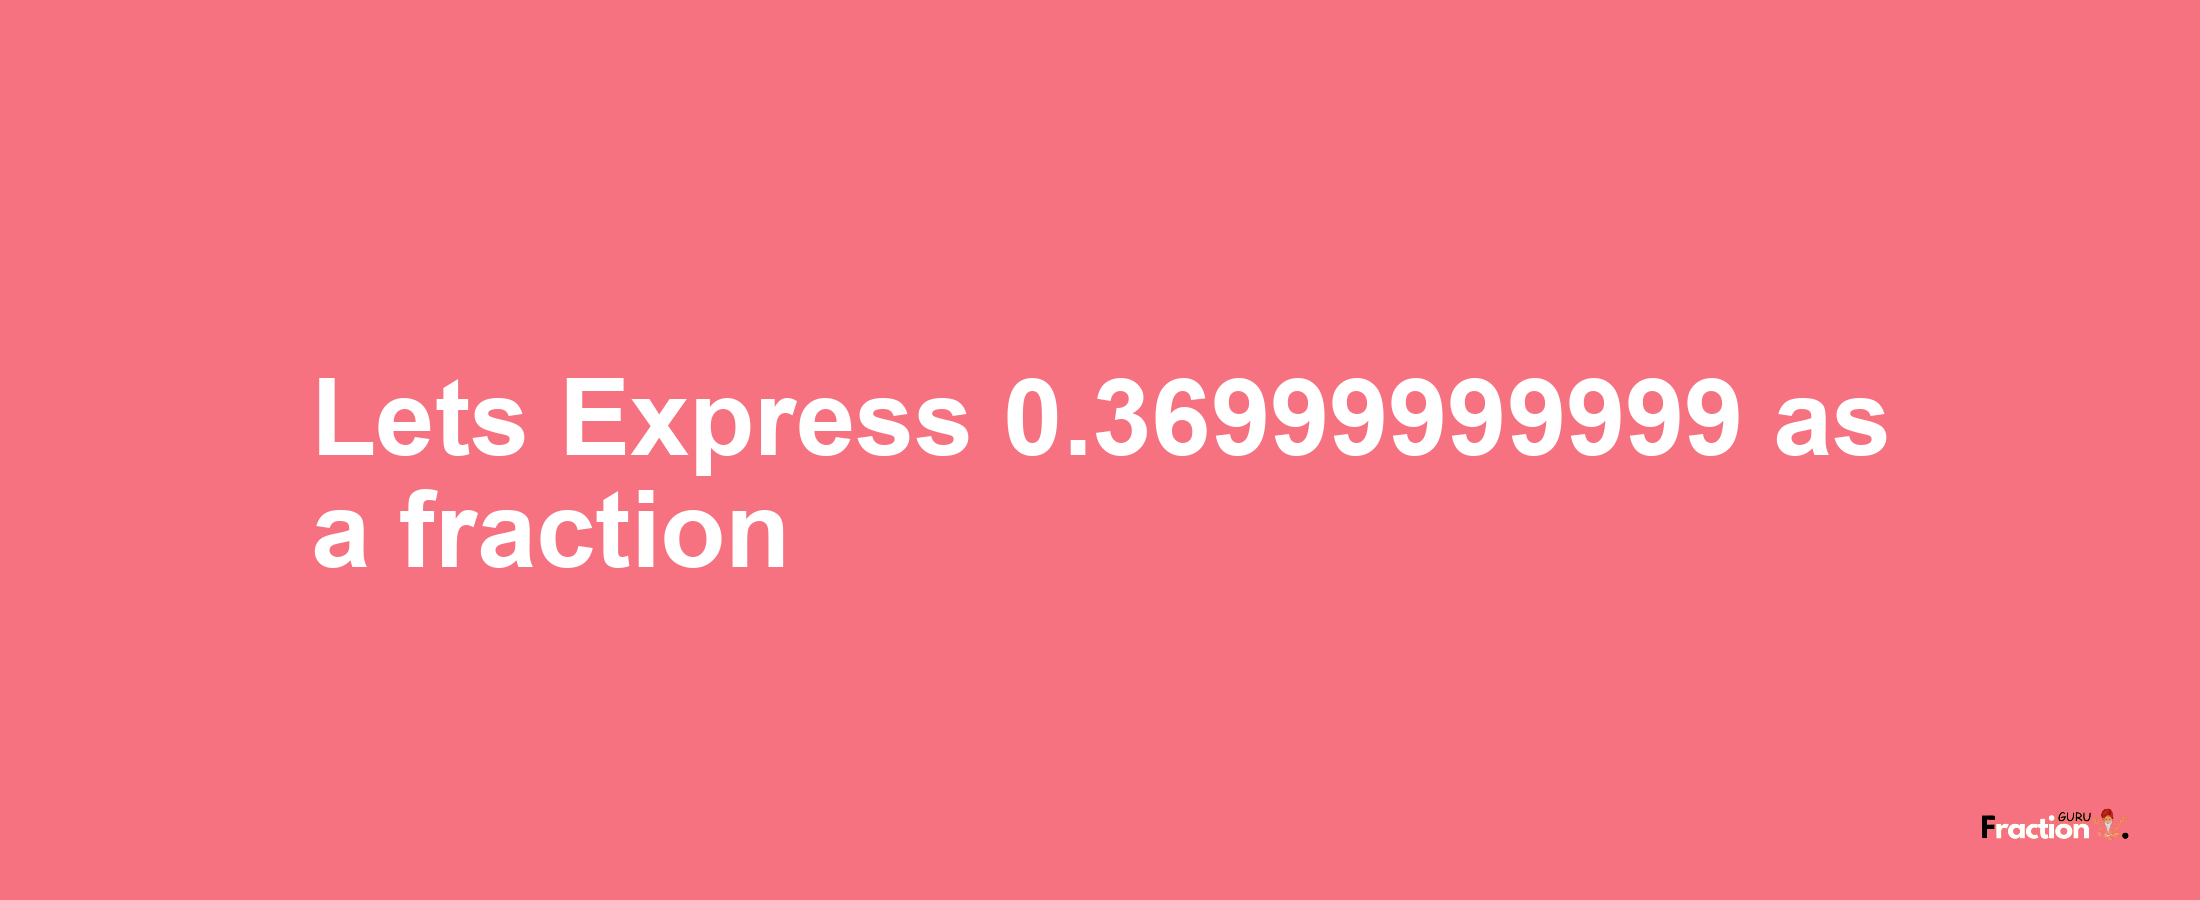 Lets Express 0.36999999999 as afraction